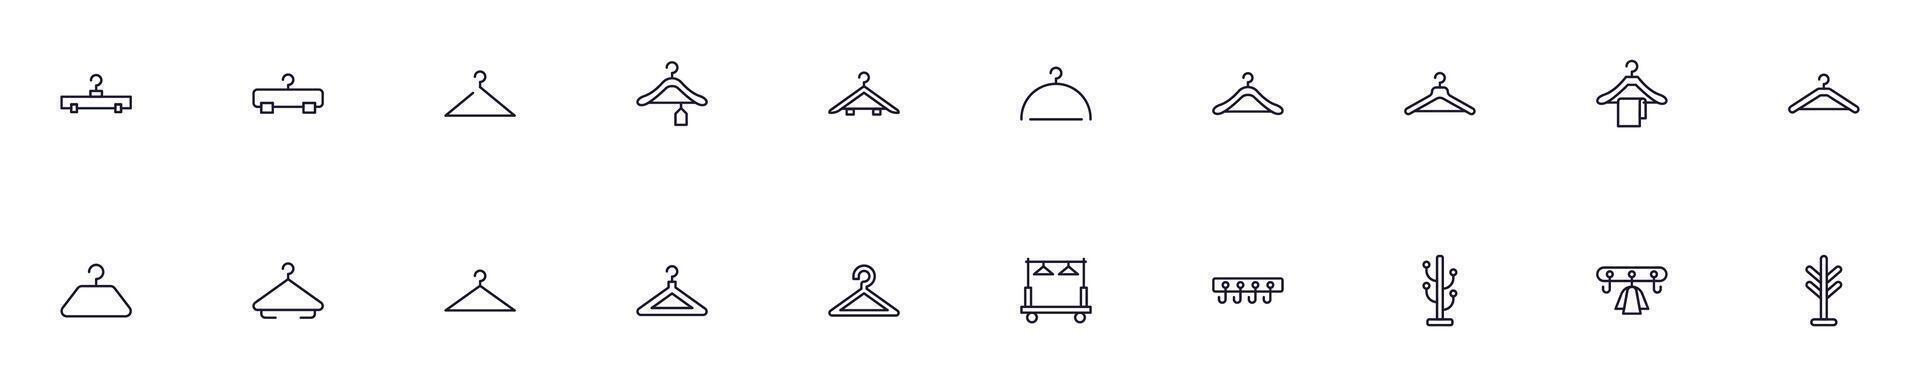 Collections of line icons of clothes hanger. Simple linear illustration that perfect for web banners, social networks, articles, infographics vector